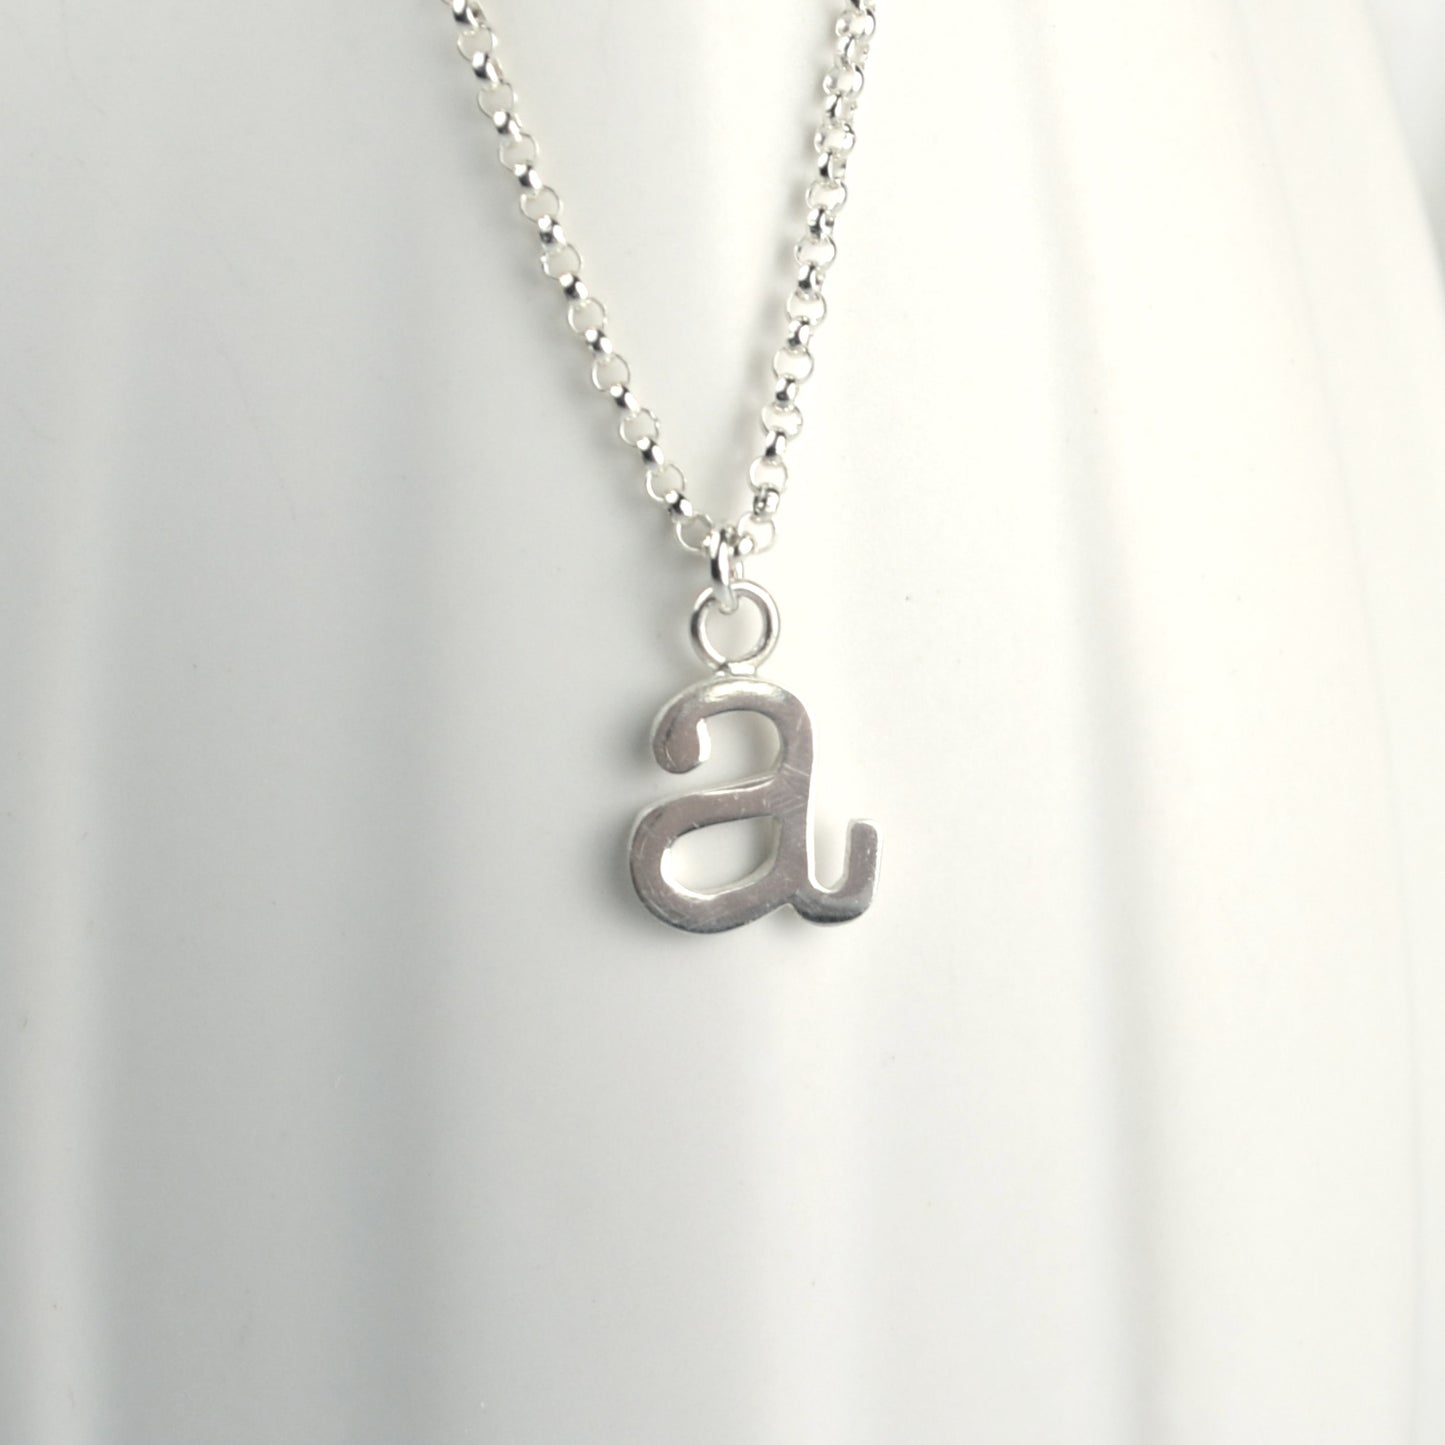 Sterling Silver Lower-Case Letter Pendants with 18 inch Chain